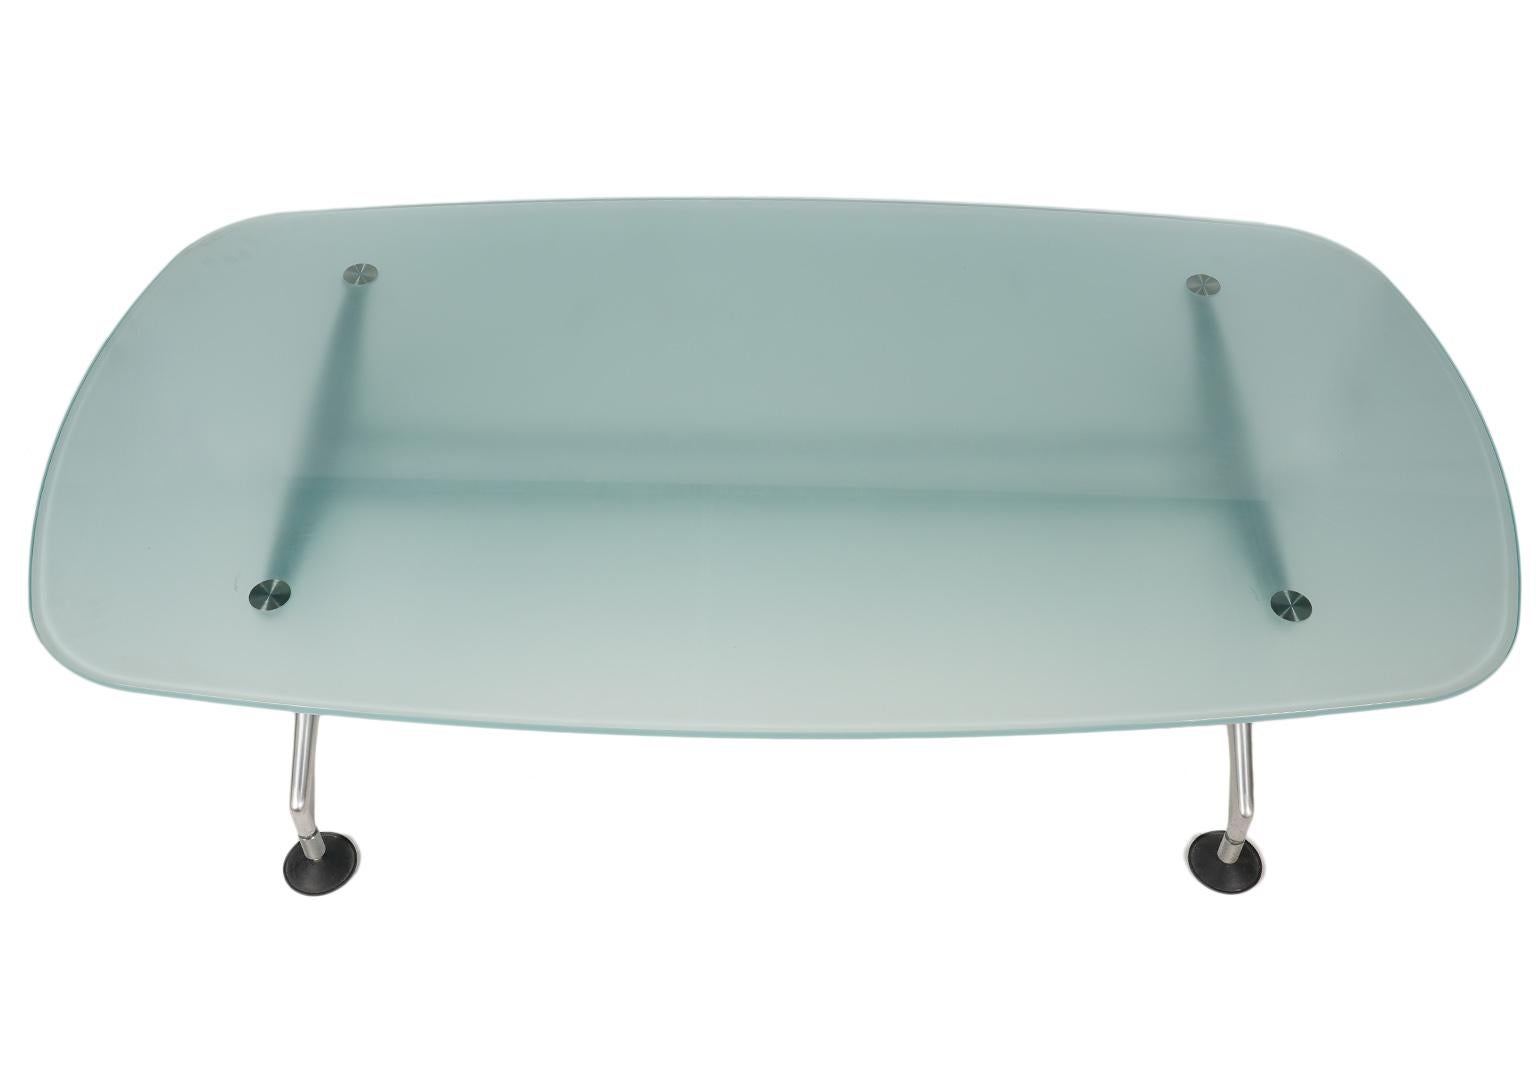 This modern coffee table designed by Antonio Citterio for Vitra, Germany features a slightly curved rectangle made of tempered frosted and slightly colored glass resting on a brushed metal support with four angled legs ending in circular pad feet.